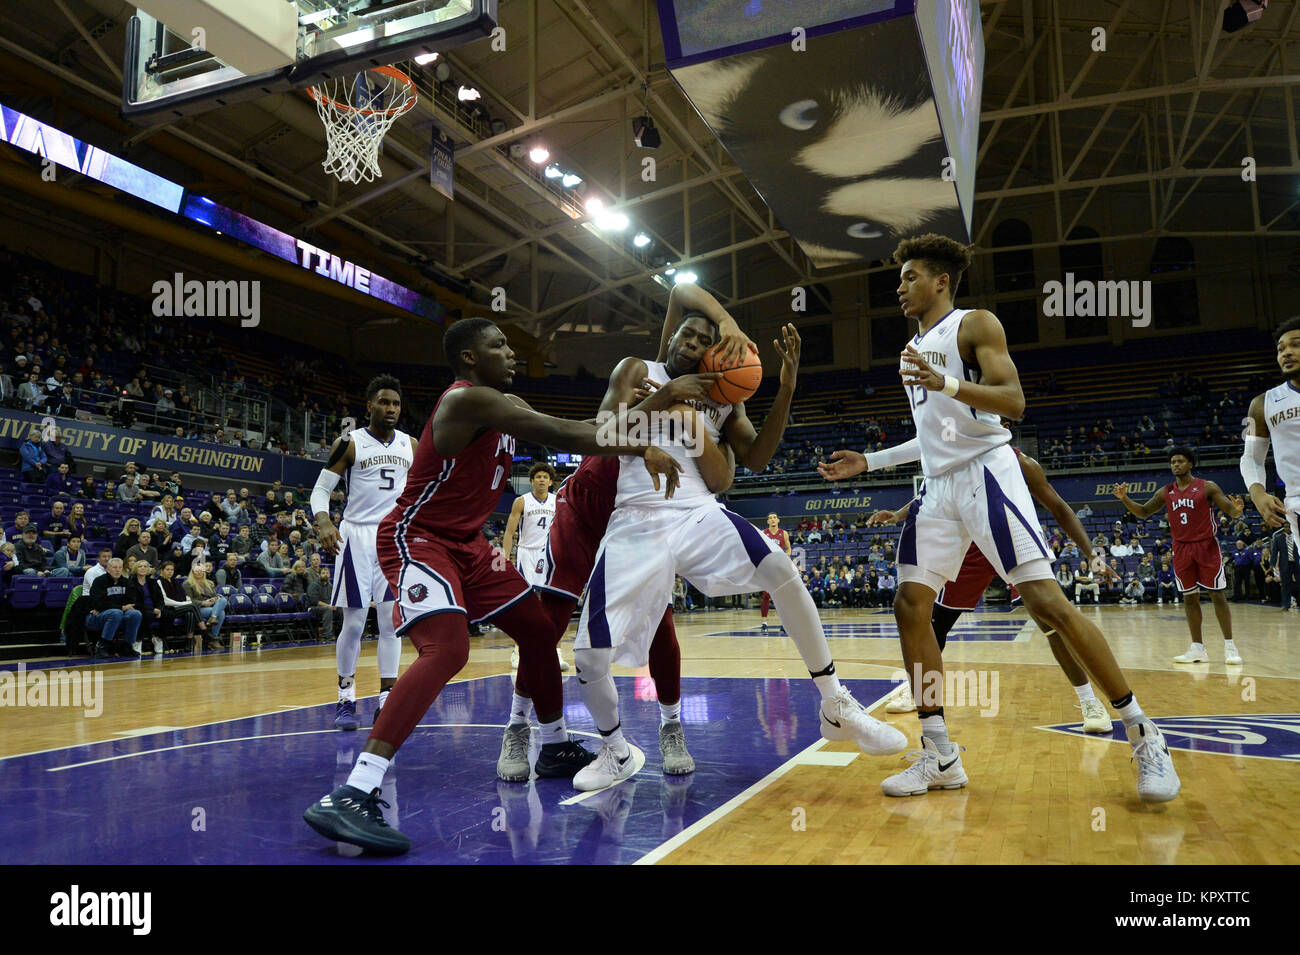 Seattle, WA, USA. 17th Dec, 2017. UW center Noah Dickerson (15) is fouled by LMU's Zafir Williams (1) during an NCAA basketball game between the Washington Huskies and LMU Lions. The game was played at Hec Ed Pavilion in Seattle, WA. Jeff Halstead/CSM/Alamy Live News Stock Photo